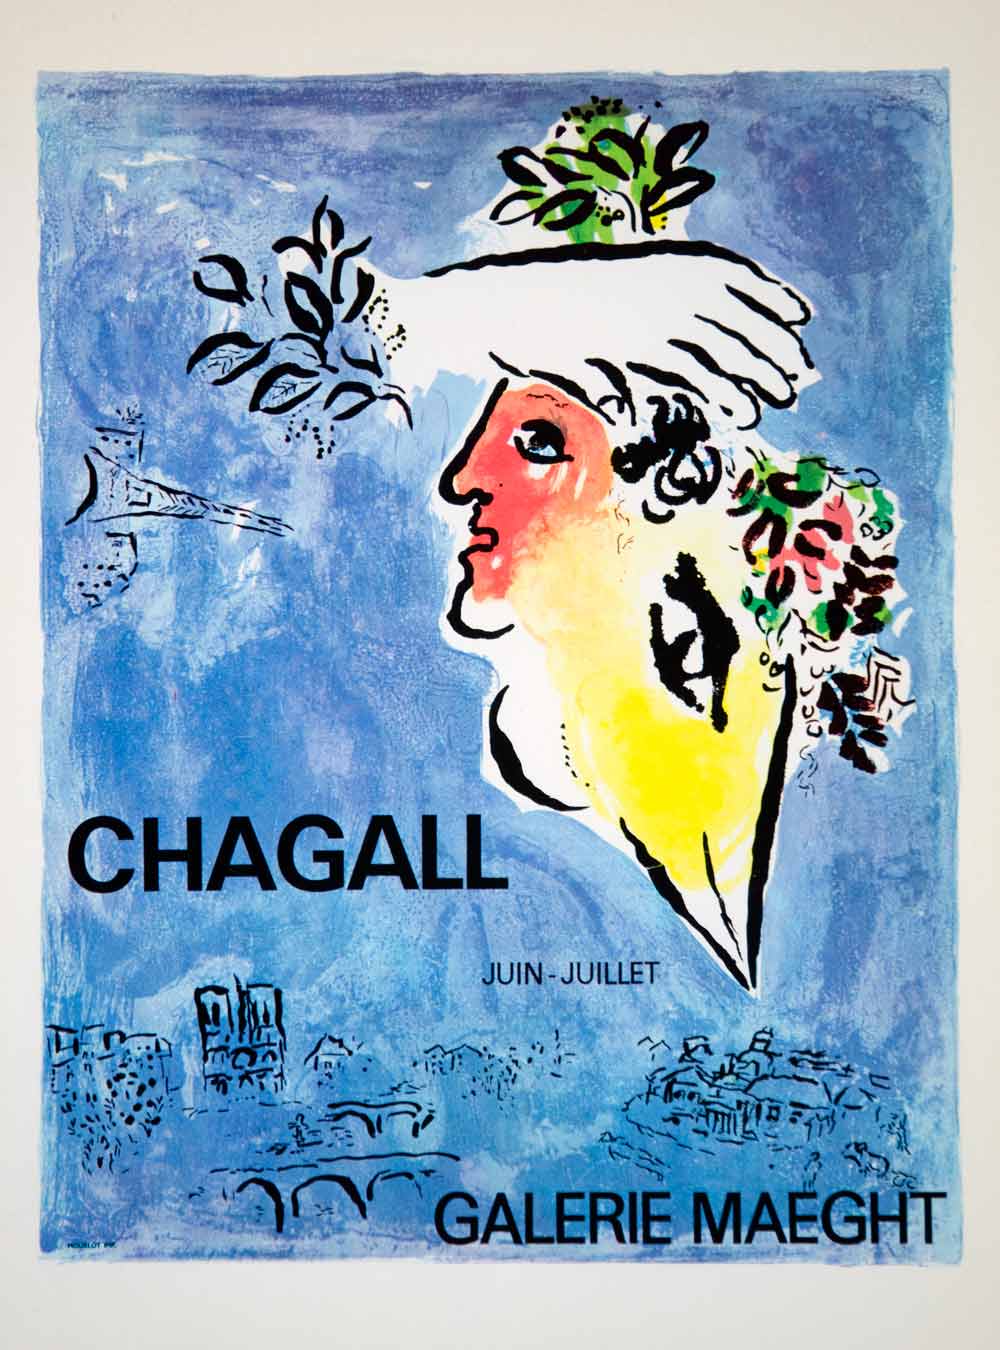 1966 Lithograph Marc Chagall Abstract Art Exhibition Poster Galerie Maeght Paris